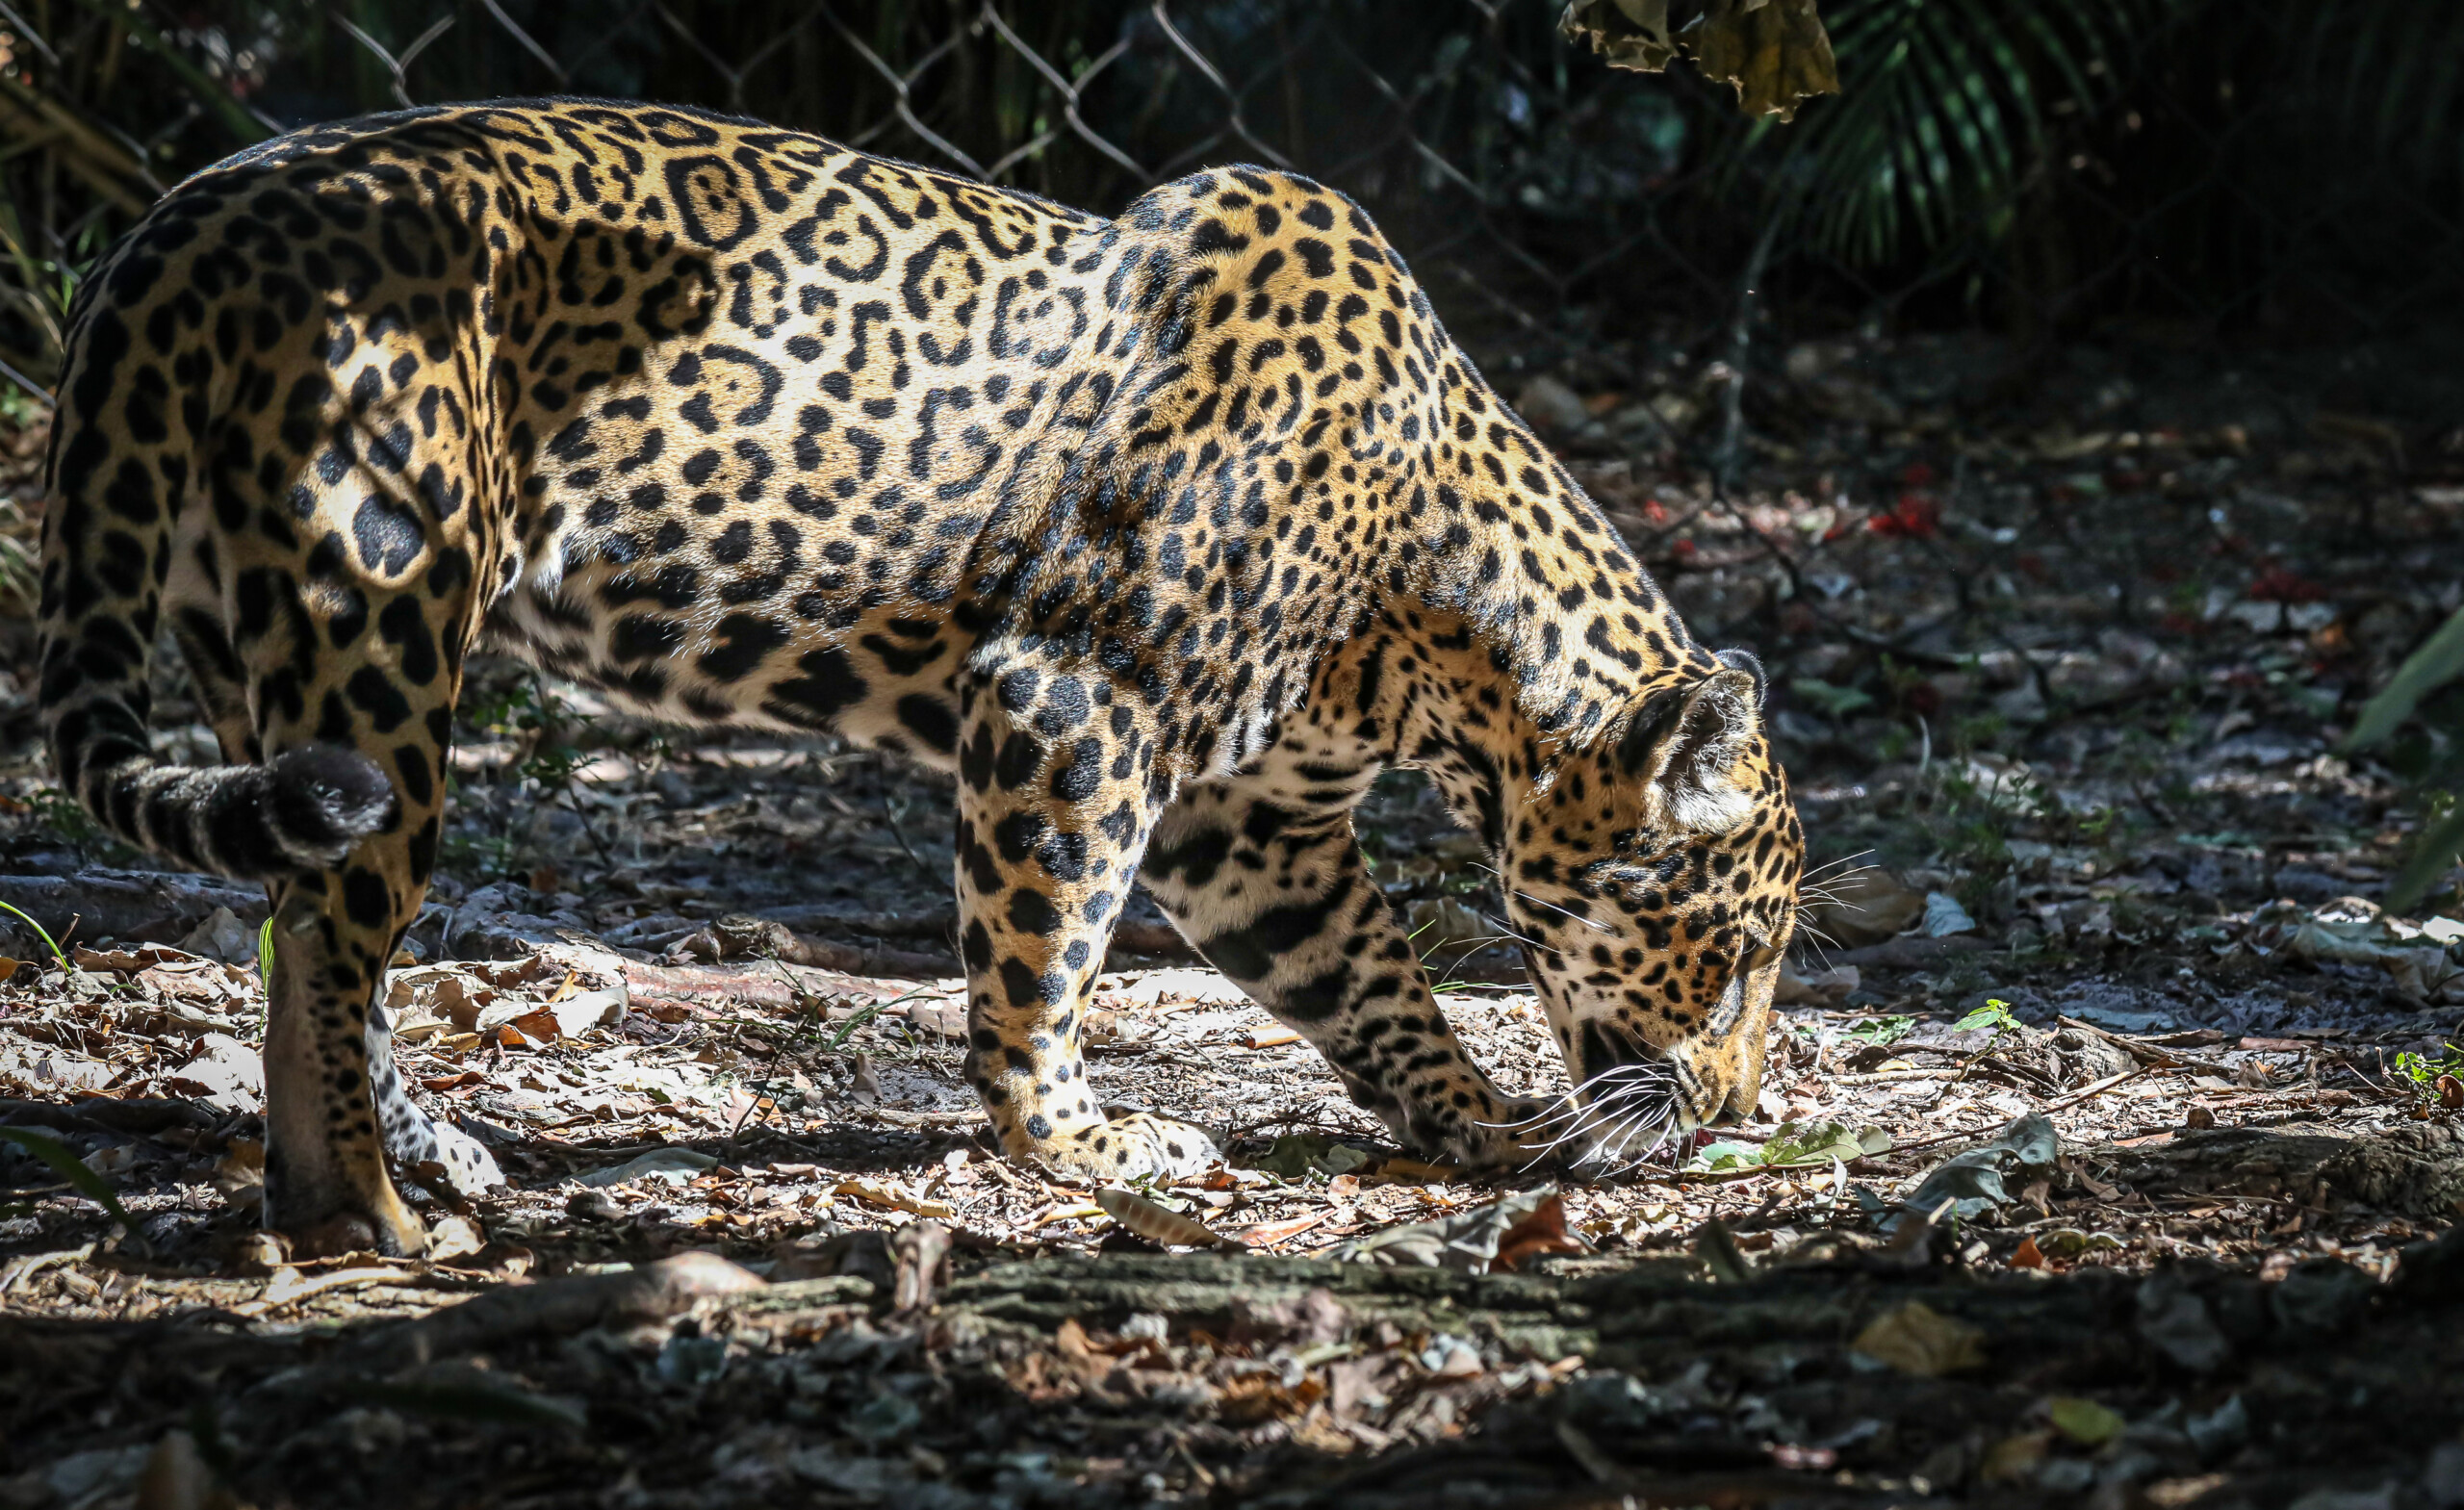 Panama Jaguar. The jaguar (Panthera onca) is the largest cat in the Americas, a member of the Felidae family and one of four "big cats" in the panthera genus.